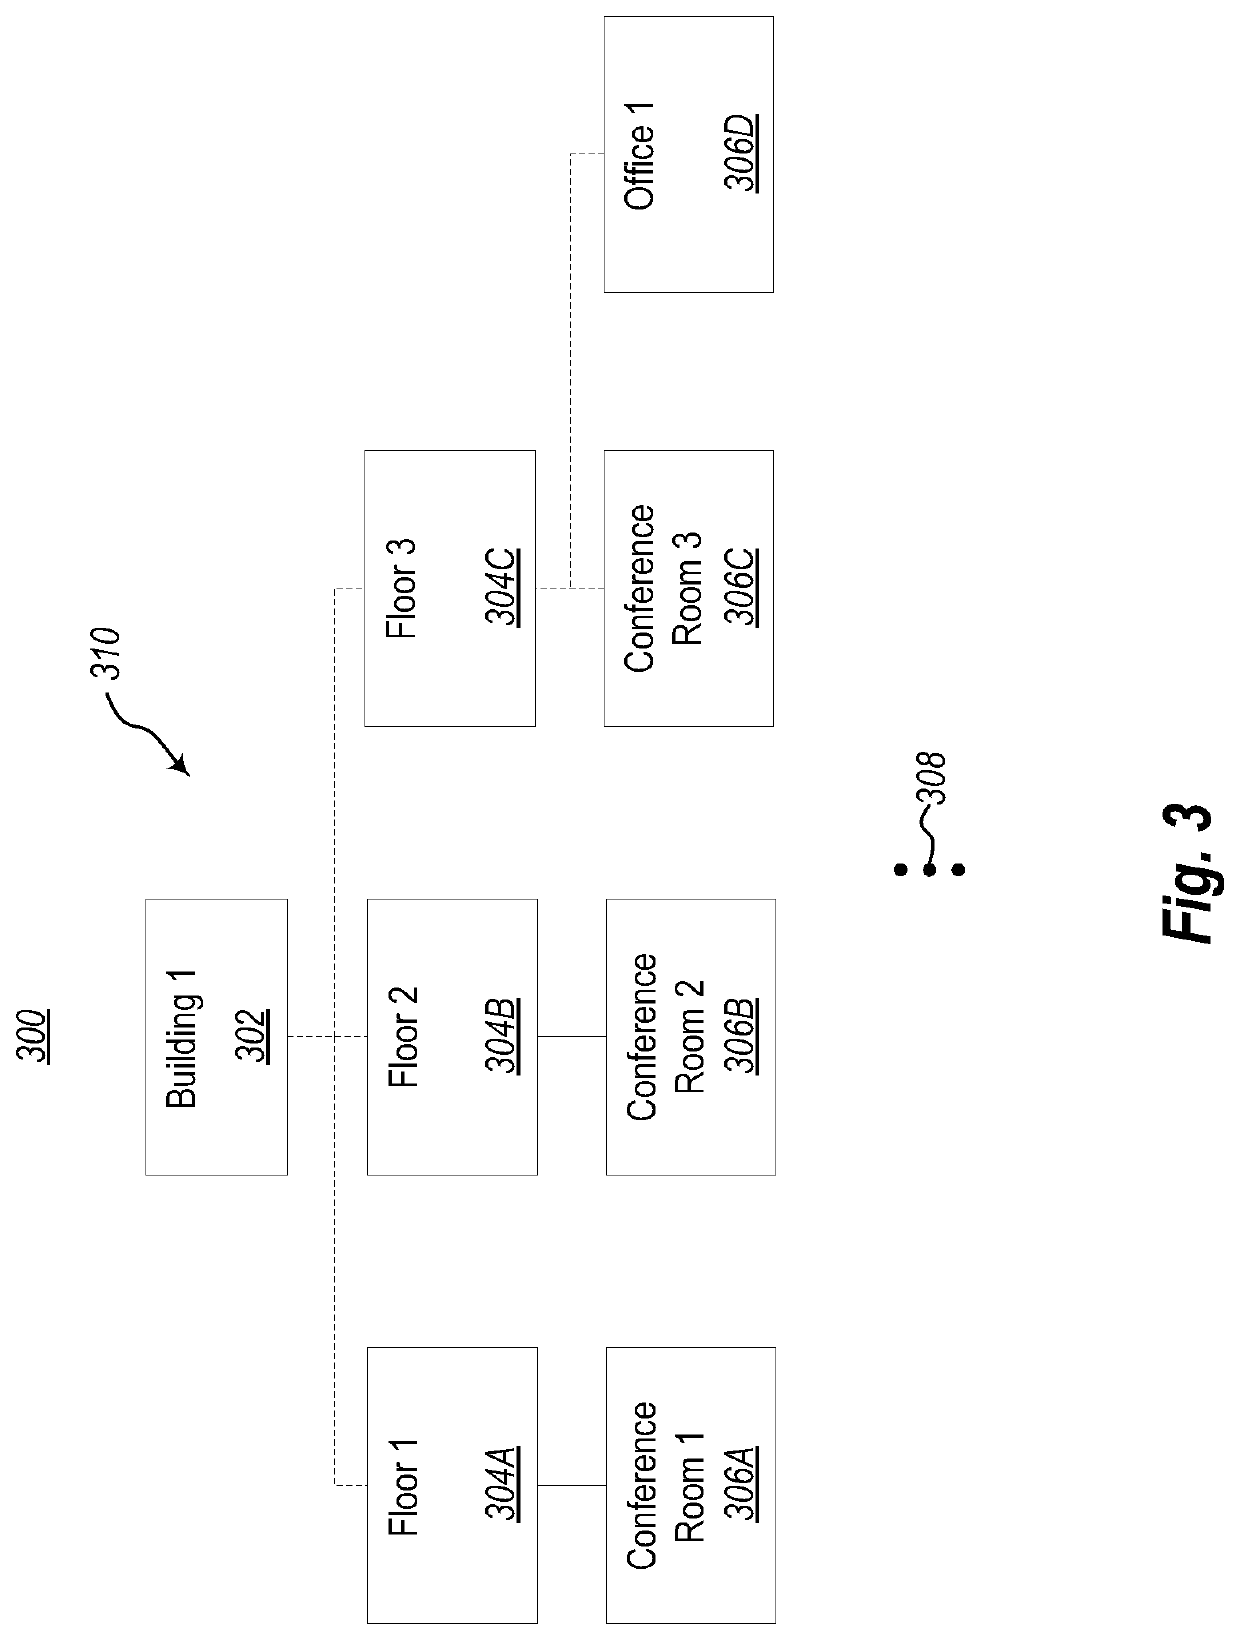 Device identification on a building automation control network